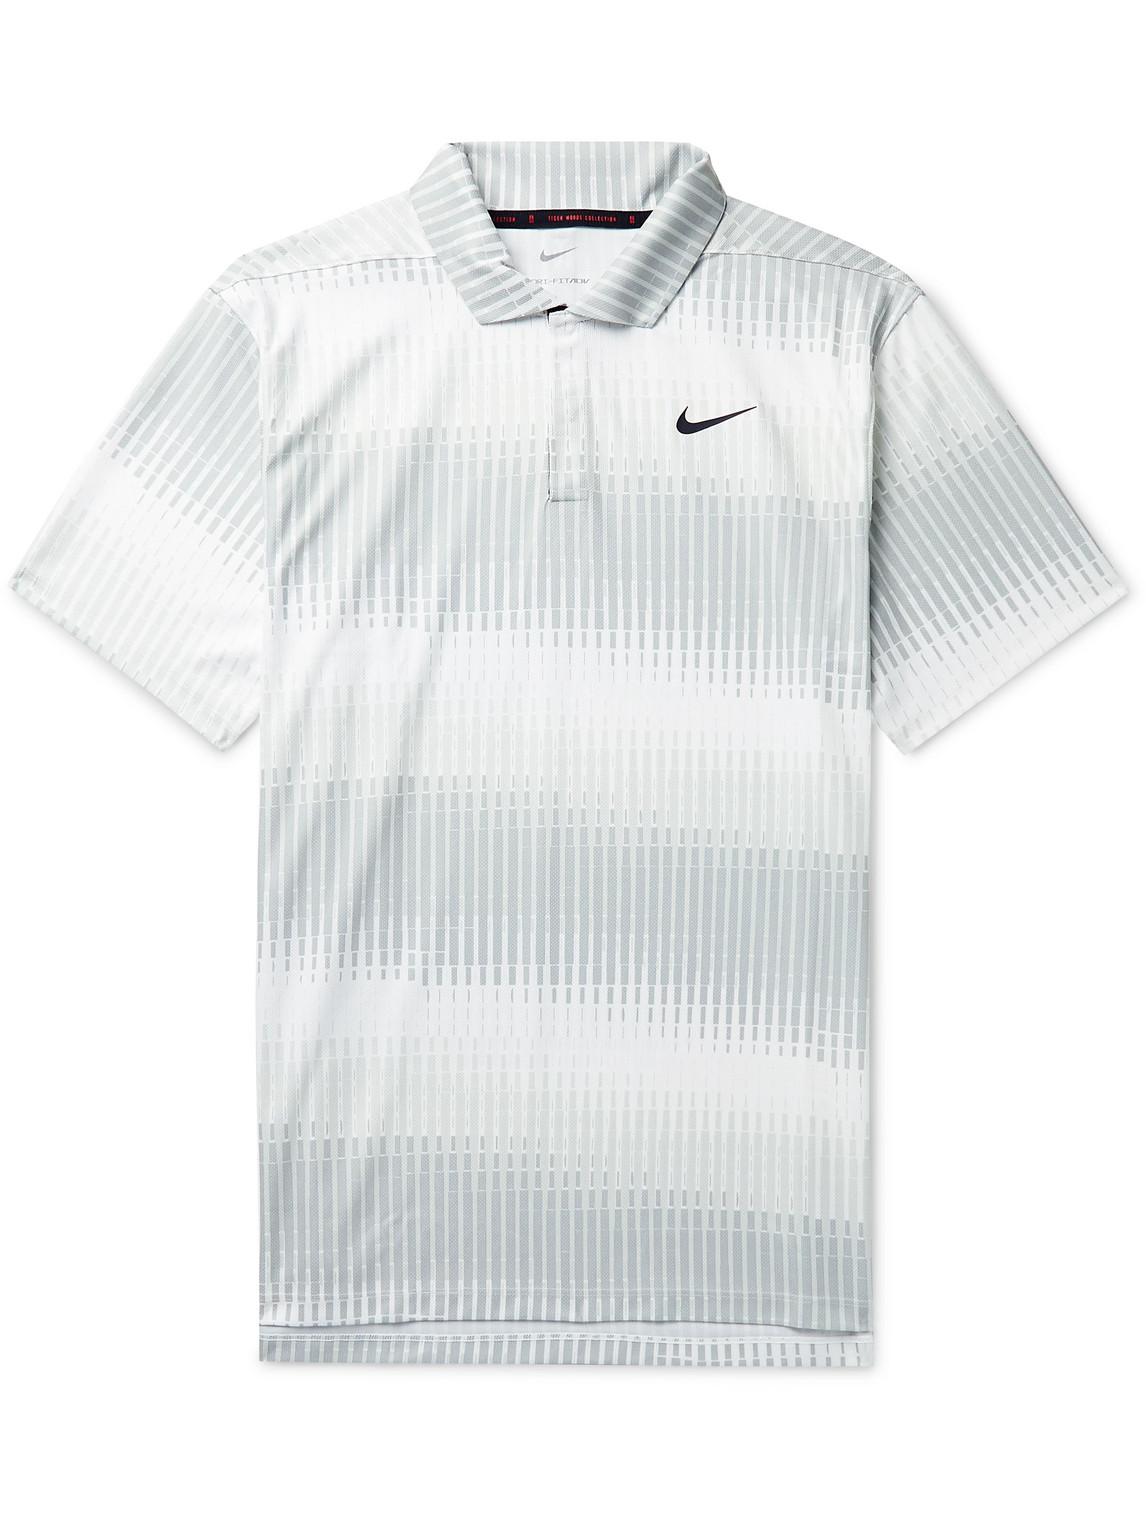 Nike Tiger Woods Dri-fit Adv Printed Golf Polo Shirt in White for Men ...